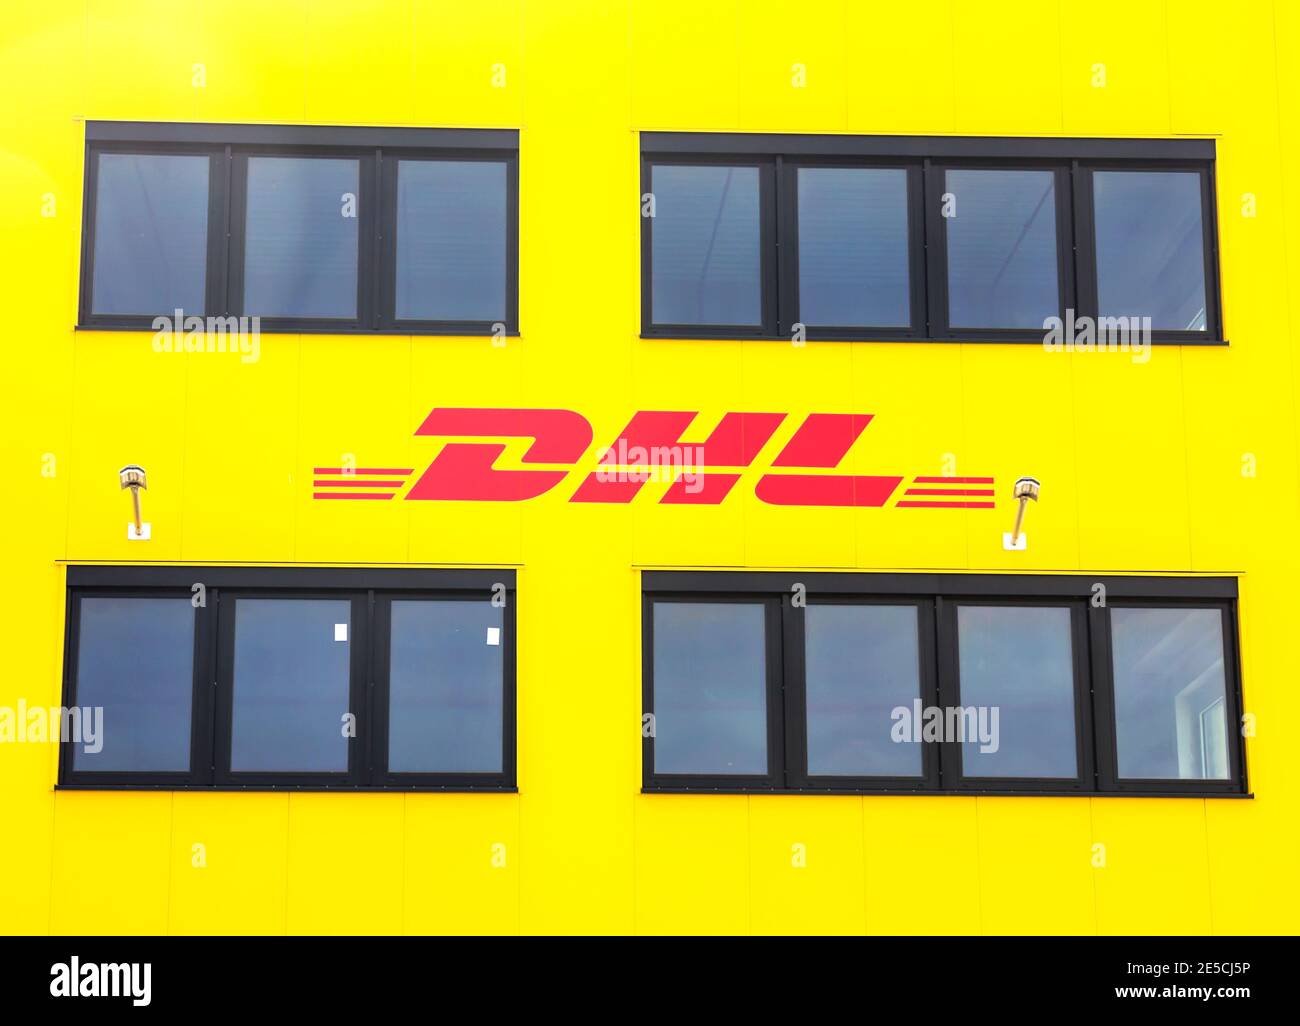 Furth, Germany : DEUTSCHE POST cargo terminal and logo on the building .Deutsche Post AG is a German courier company and the world's largest. Stock Photo